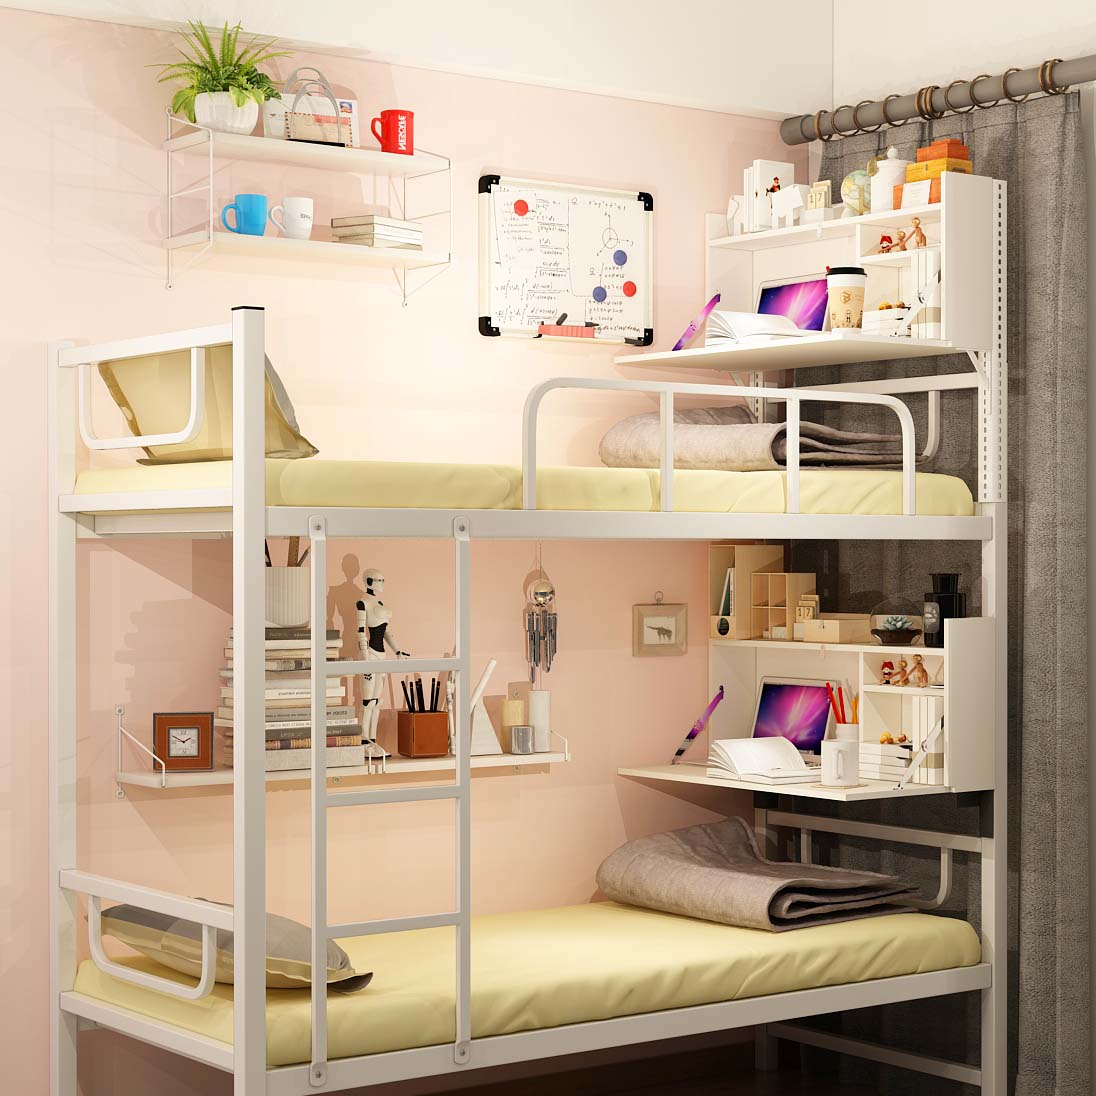 College Student Dormitory Artifact Bed, Bunk Bed With Shelves